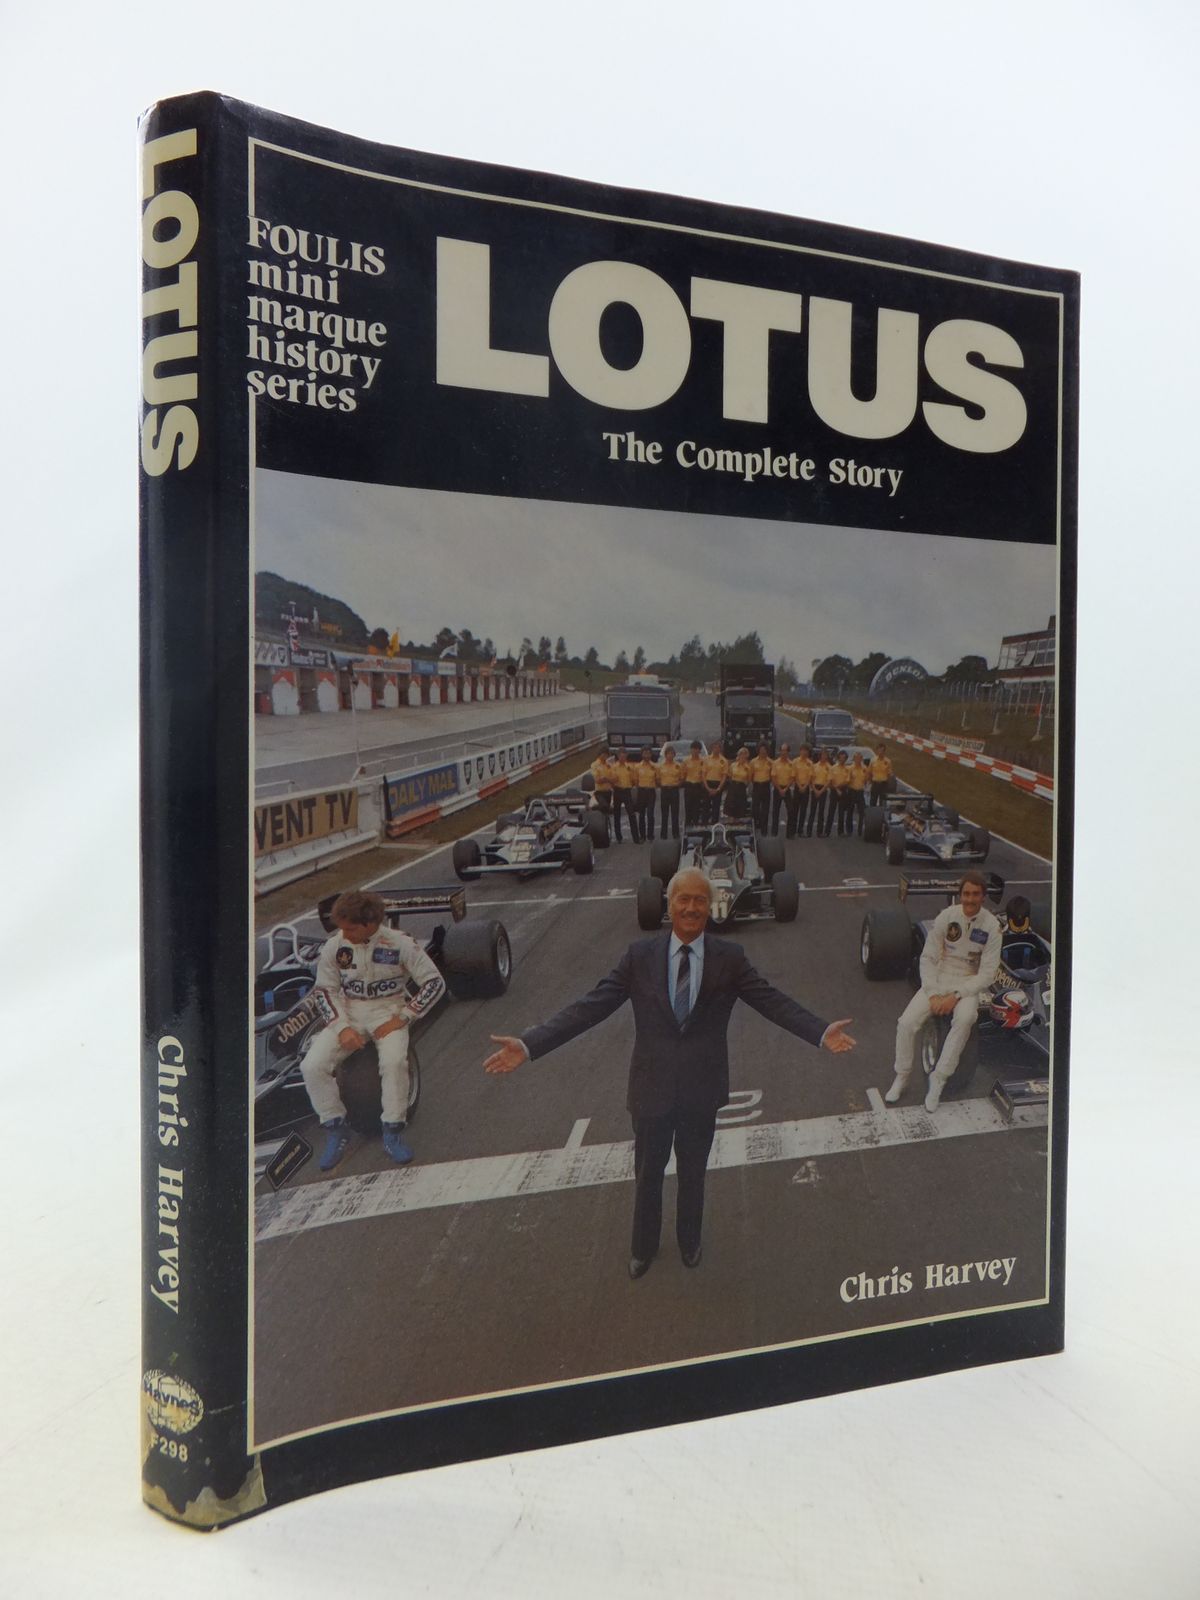 [PDF] Lotus Racing Cars Suttons Photographic History Of Transport